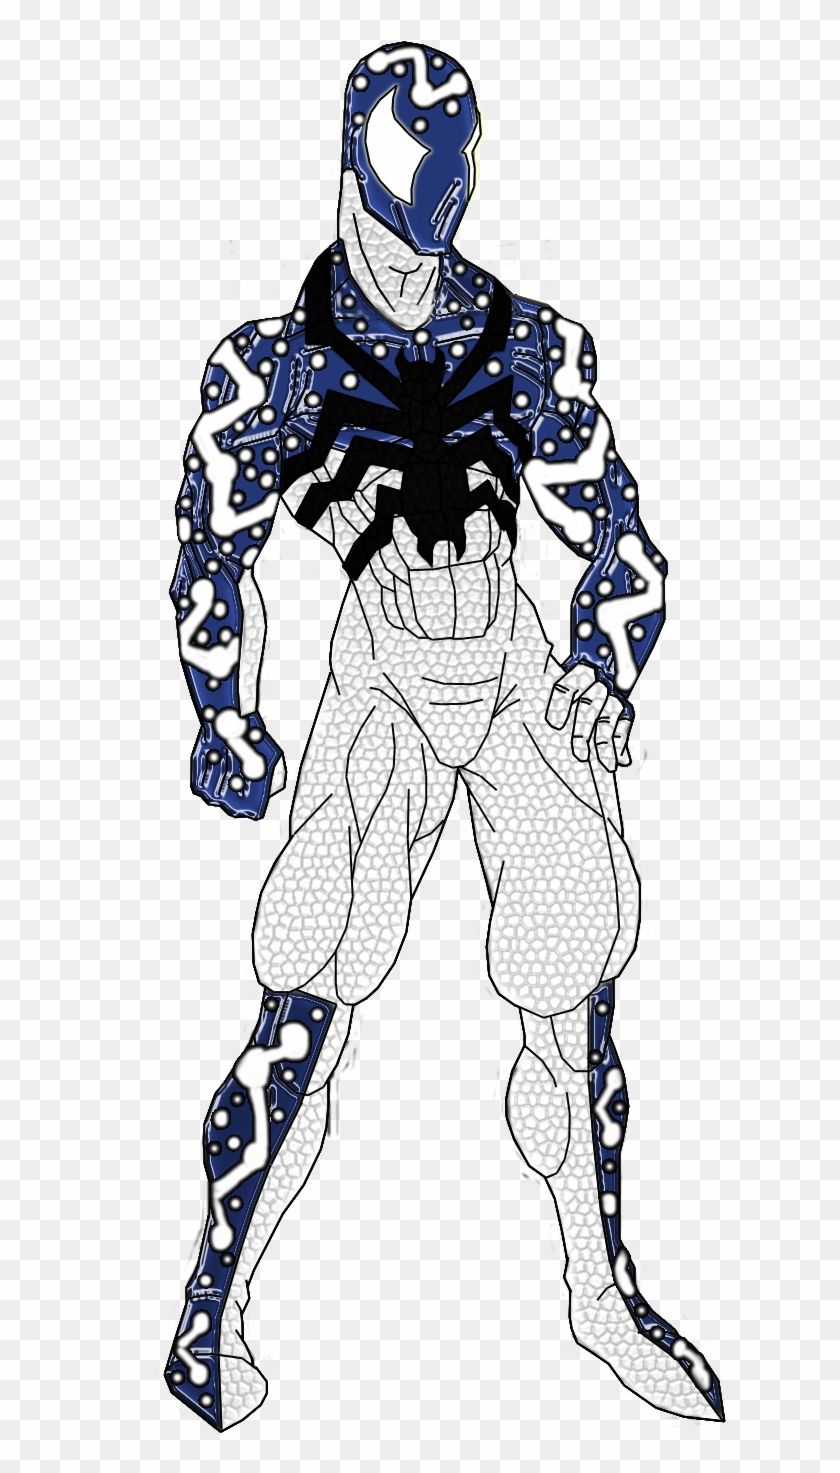 Cosmic Spiderman By Lord Dimanche Cosmic Spiderman - Cosmic Spider Man Redesign #317780